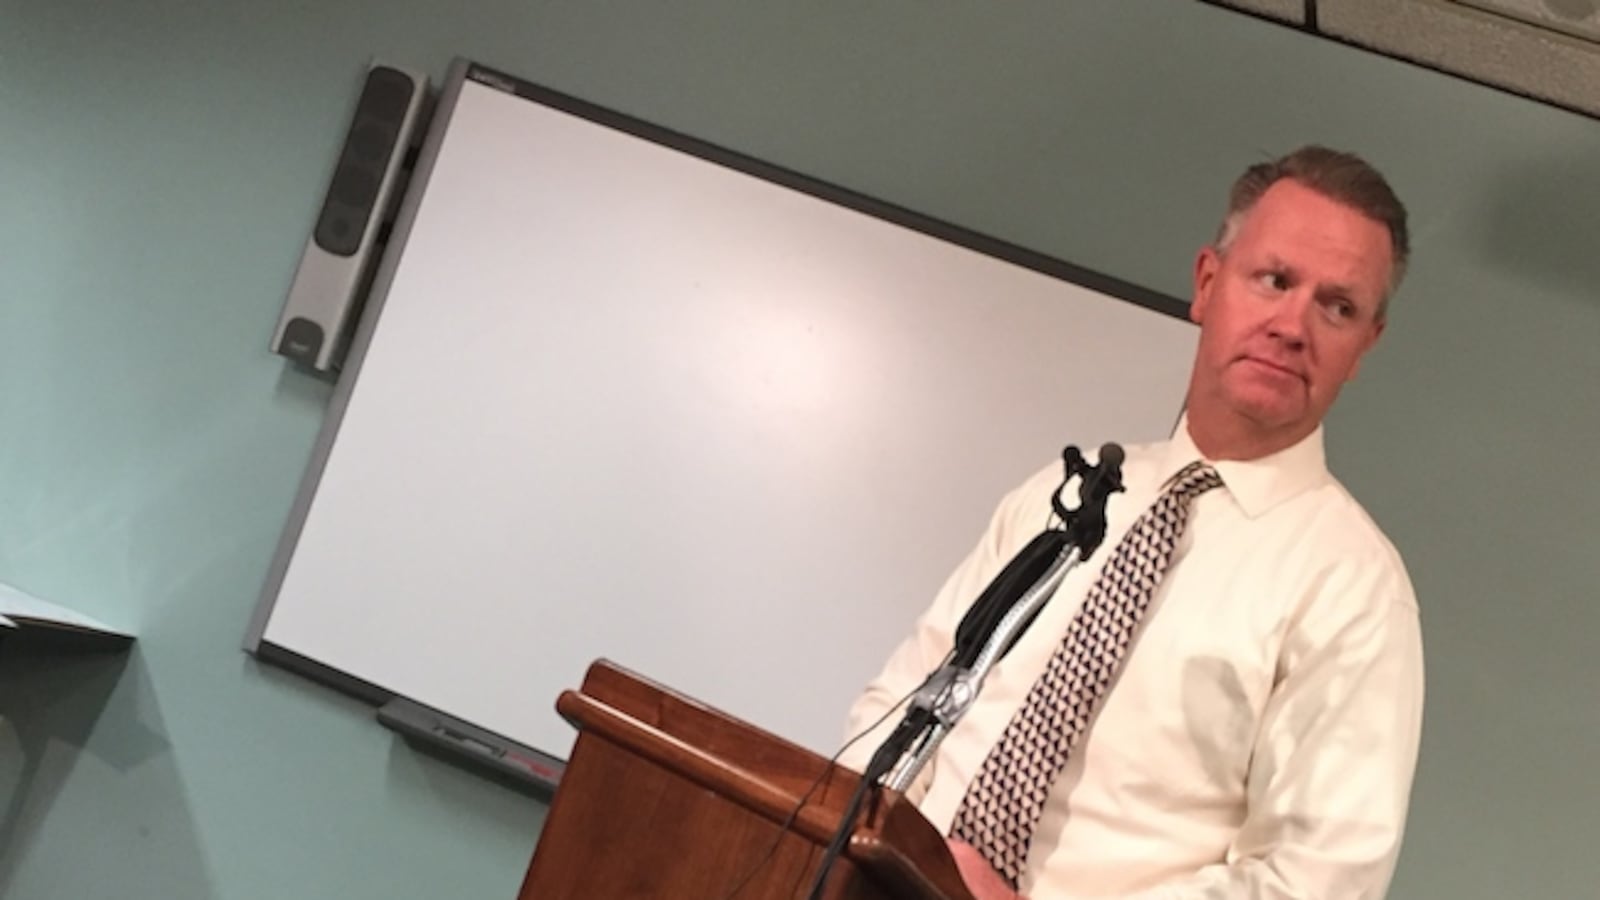 Jeffco Superintendent Dan McMinimee spoke to reporters Sept. 29 after more than half of the the teachers at two high schools called in sick or used a personal day. Classes were canceled at those schools.